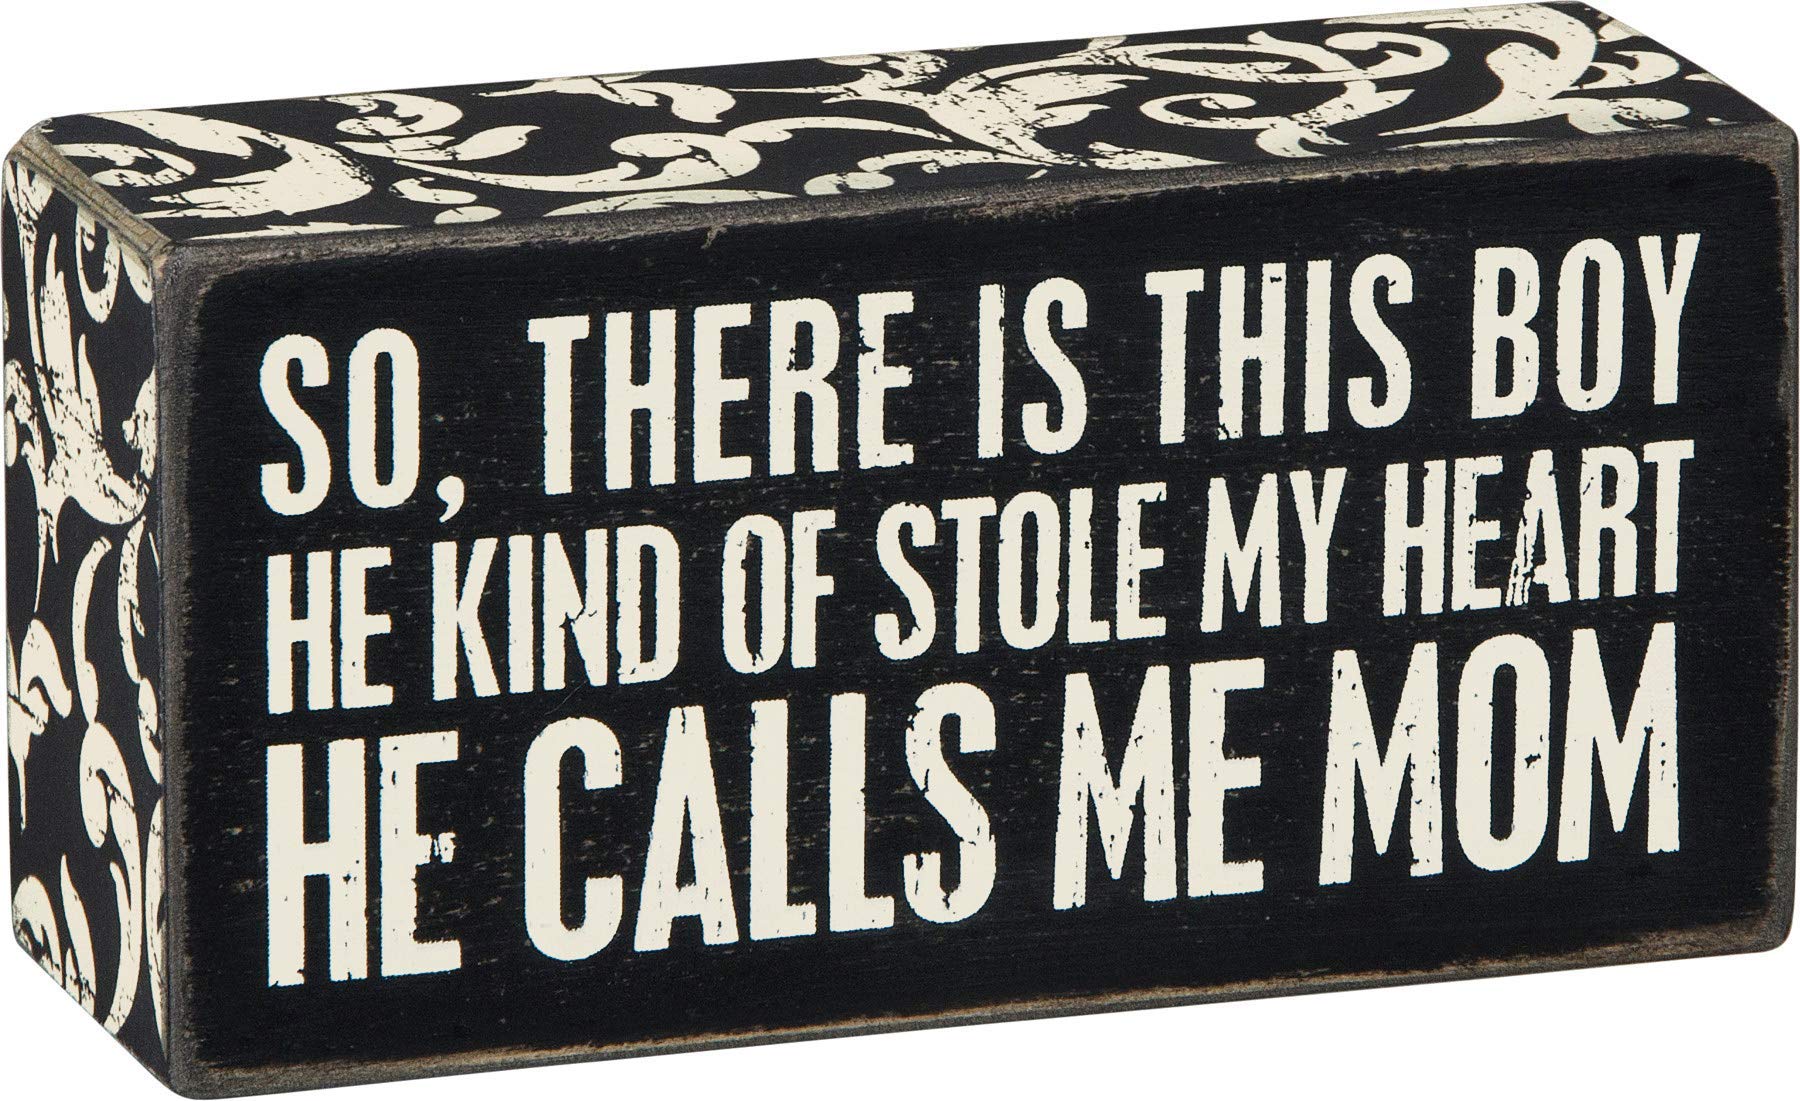 Primitives by Kathy 23548 Floral Trimmed Box Sign, 5 x 2.5-Inches, Calls Me Mom